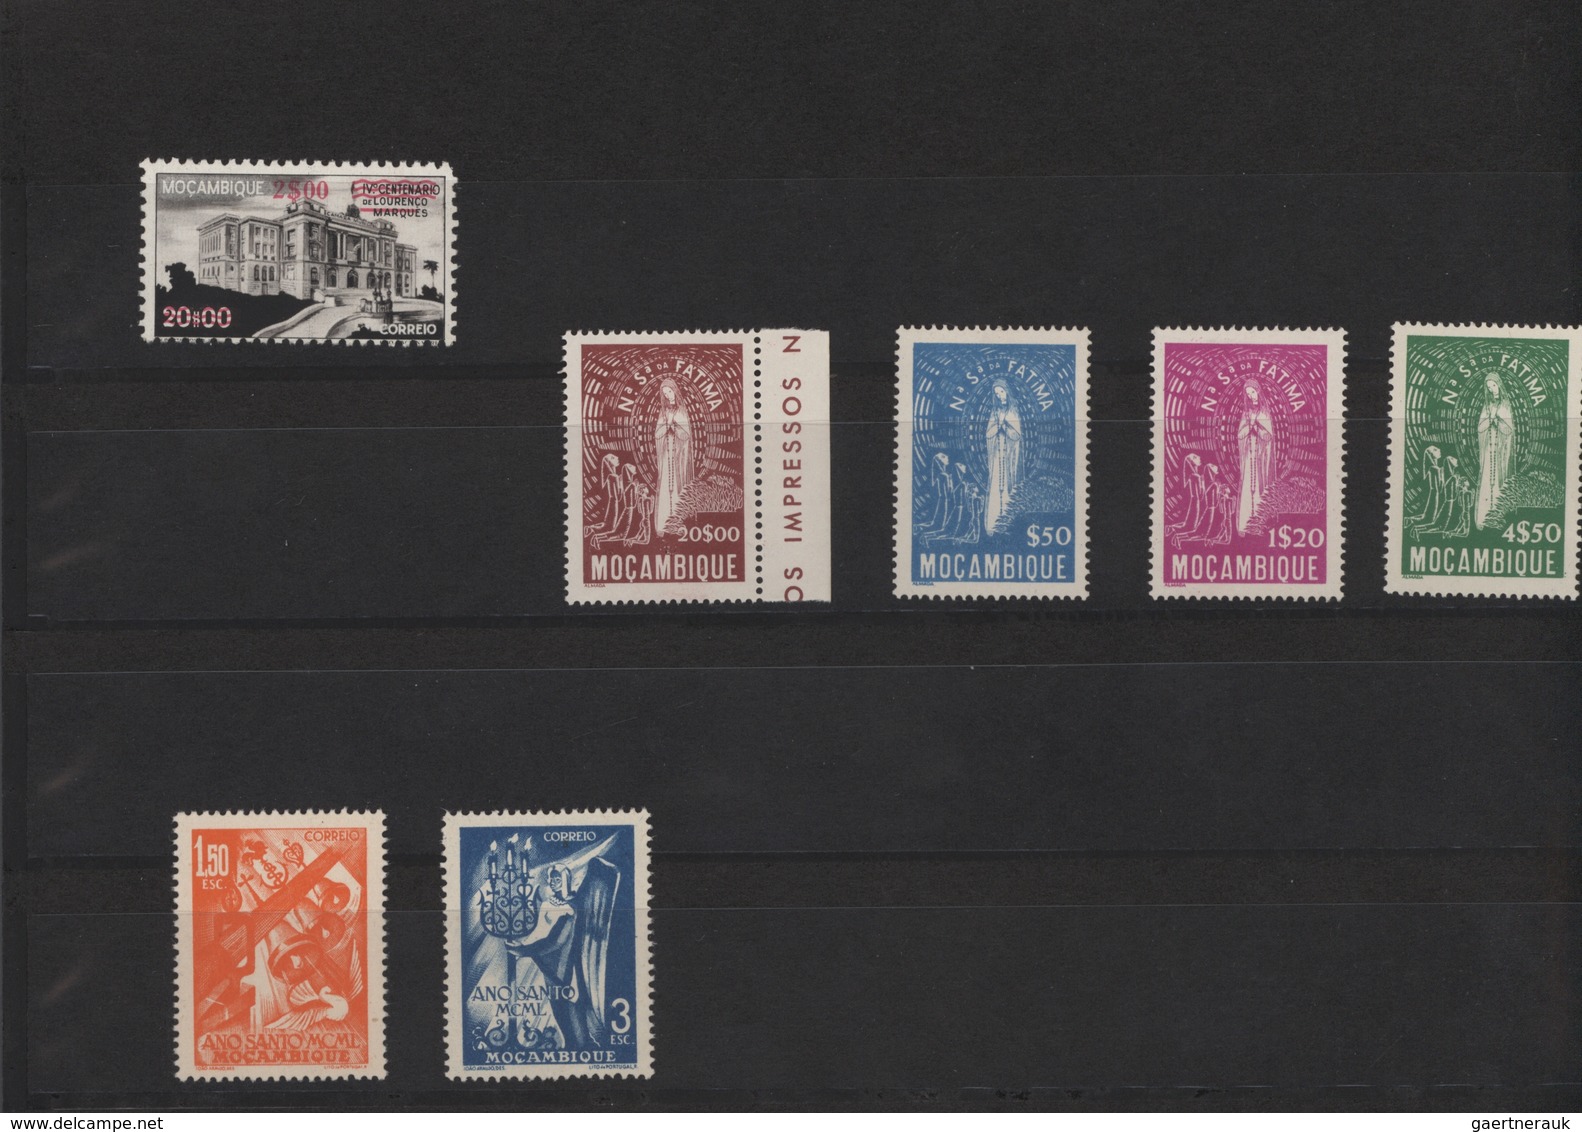 Kap Verde: 1938/1975, Beautiful Mint Never Hinged Collection Of The Portugues Colonial Stamps From T - Islas De Cabo Verde